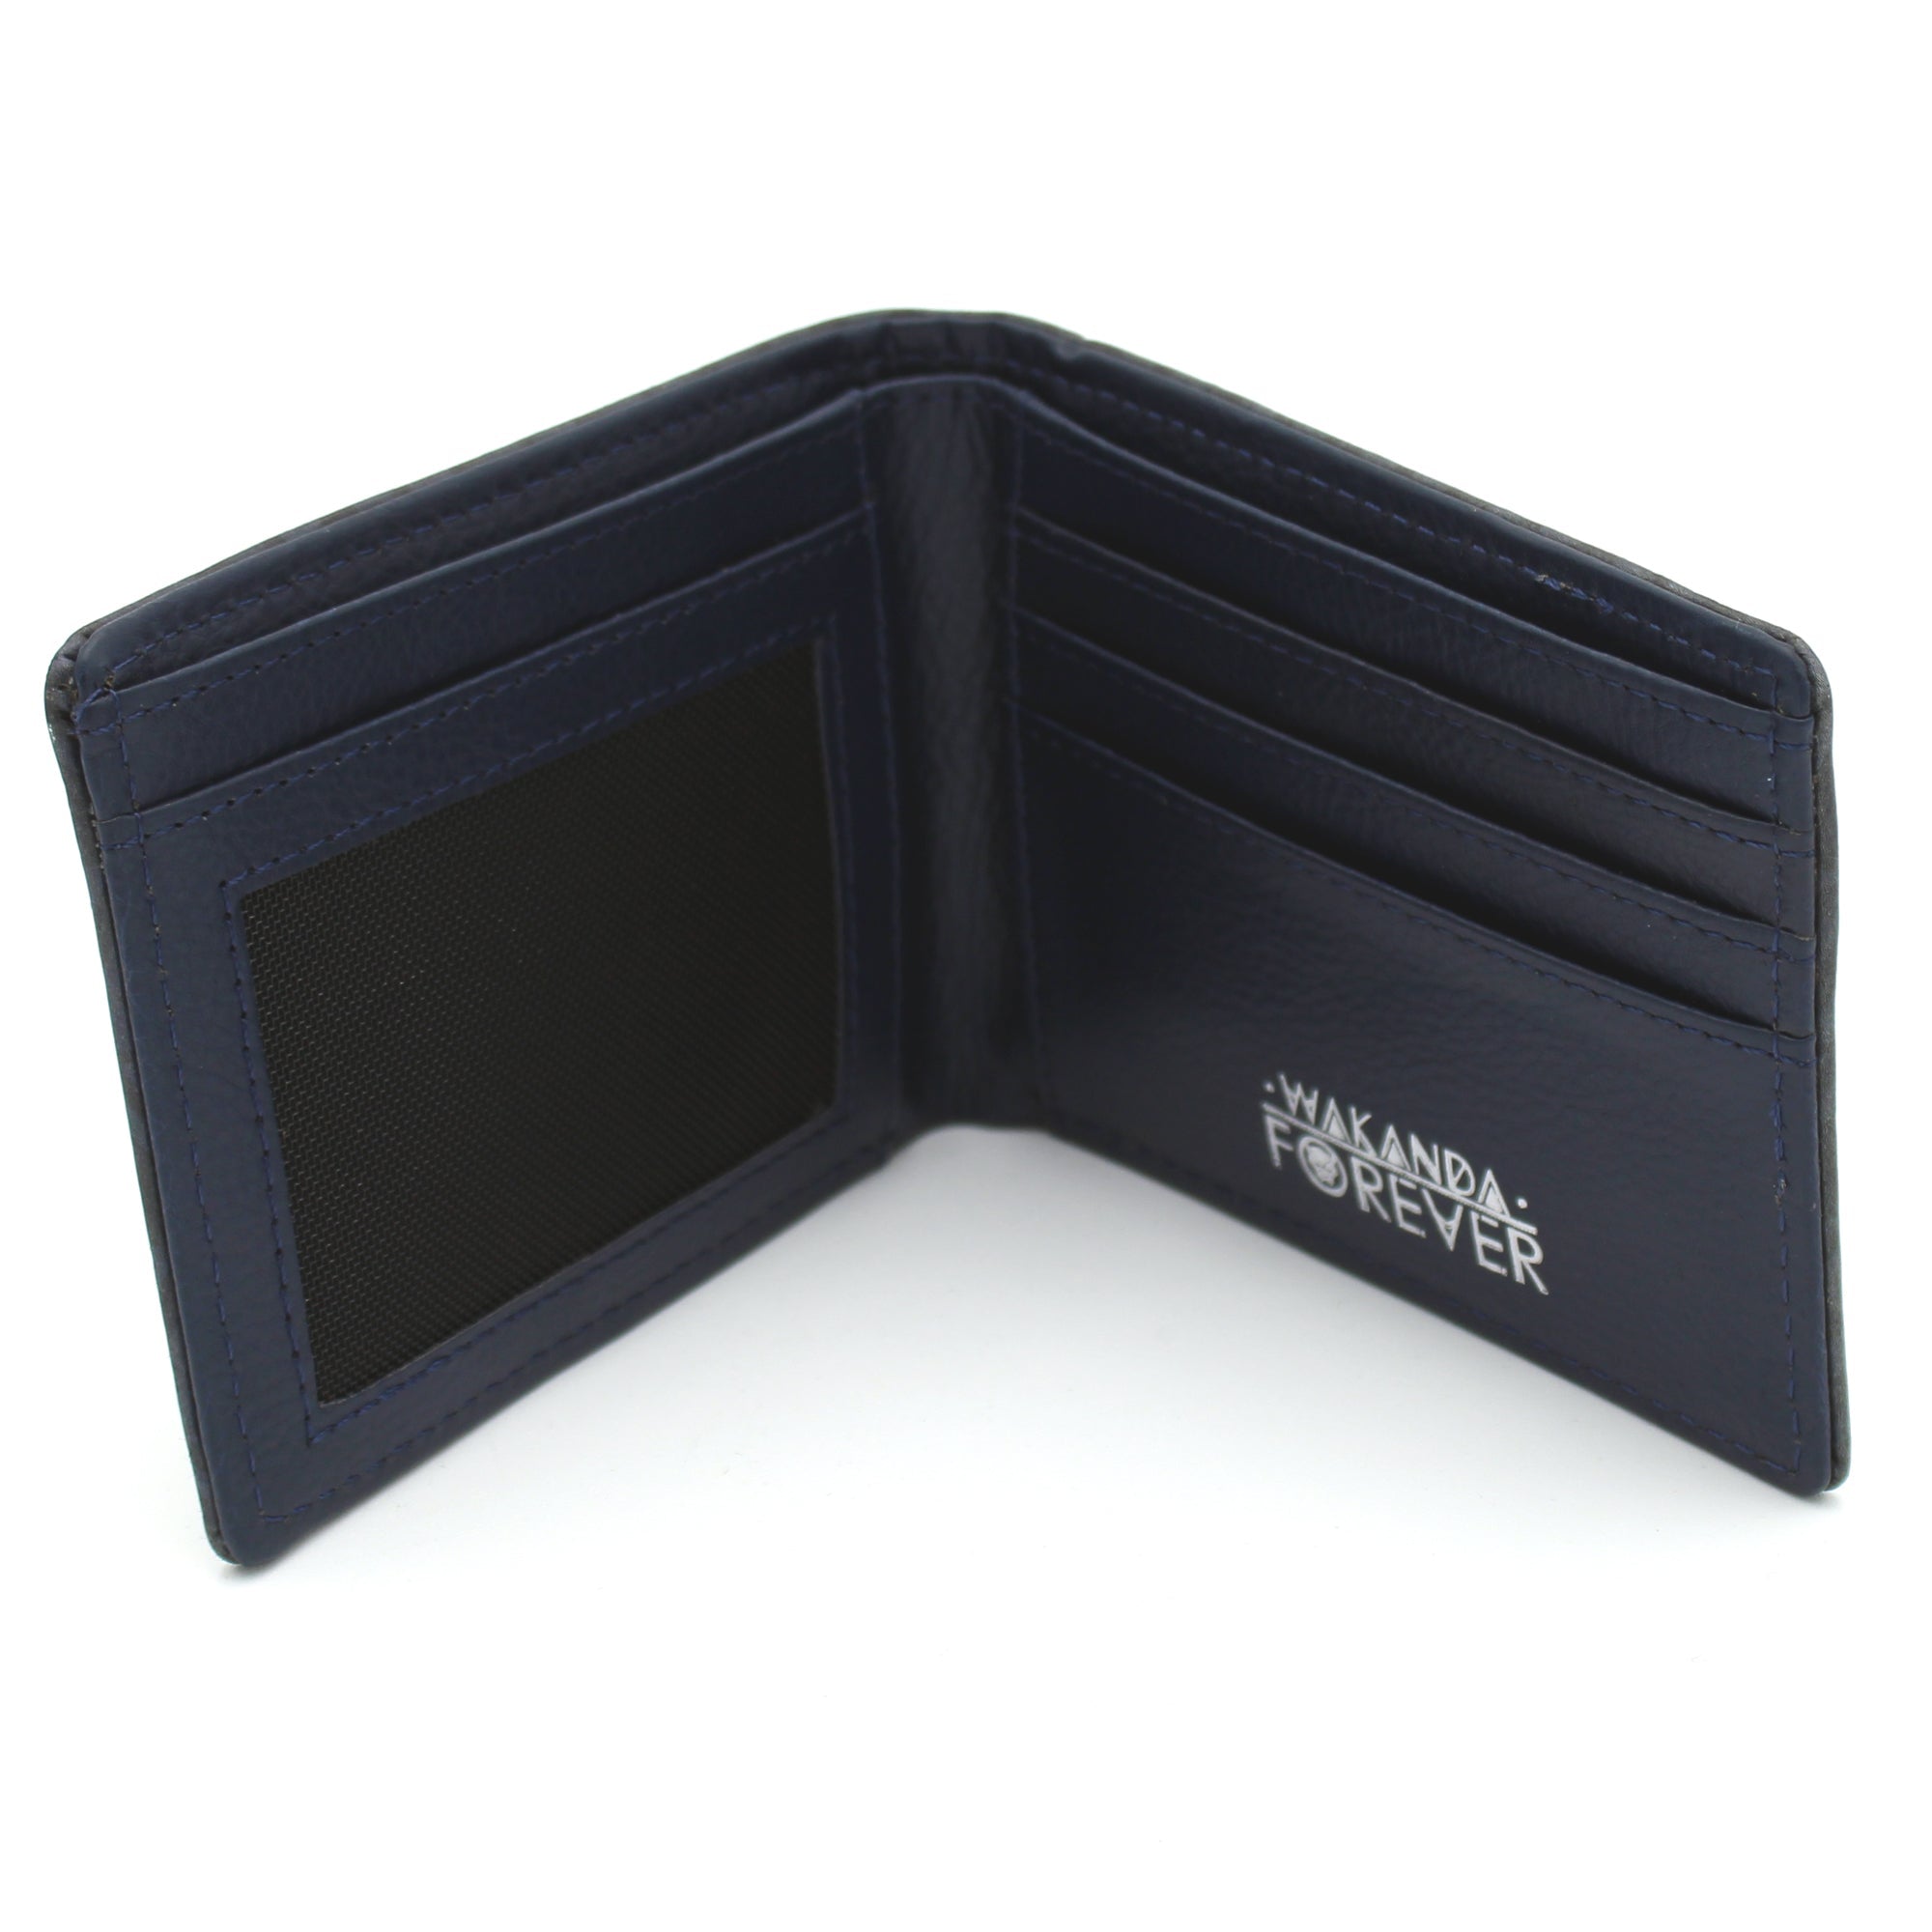 Marvel Black Panther Bi-Fold Wallet with Gift Tin - Concept One - 3